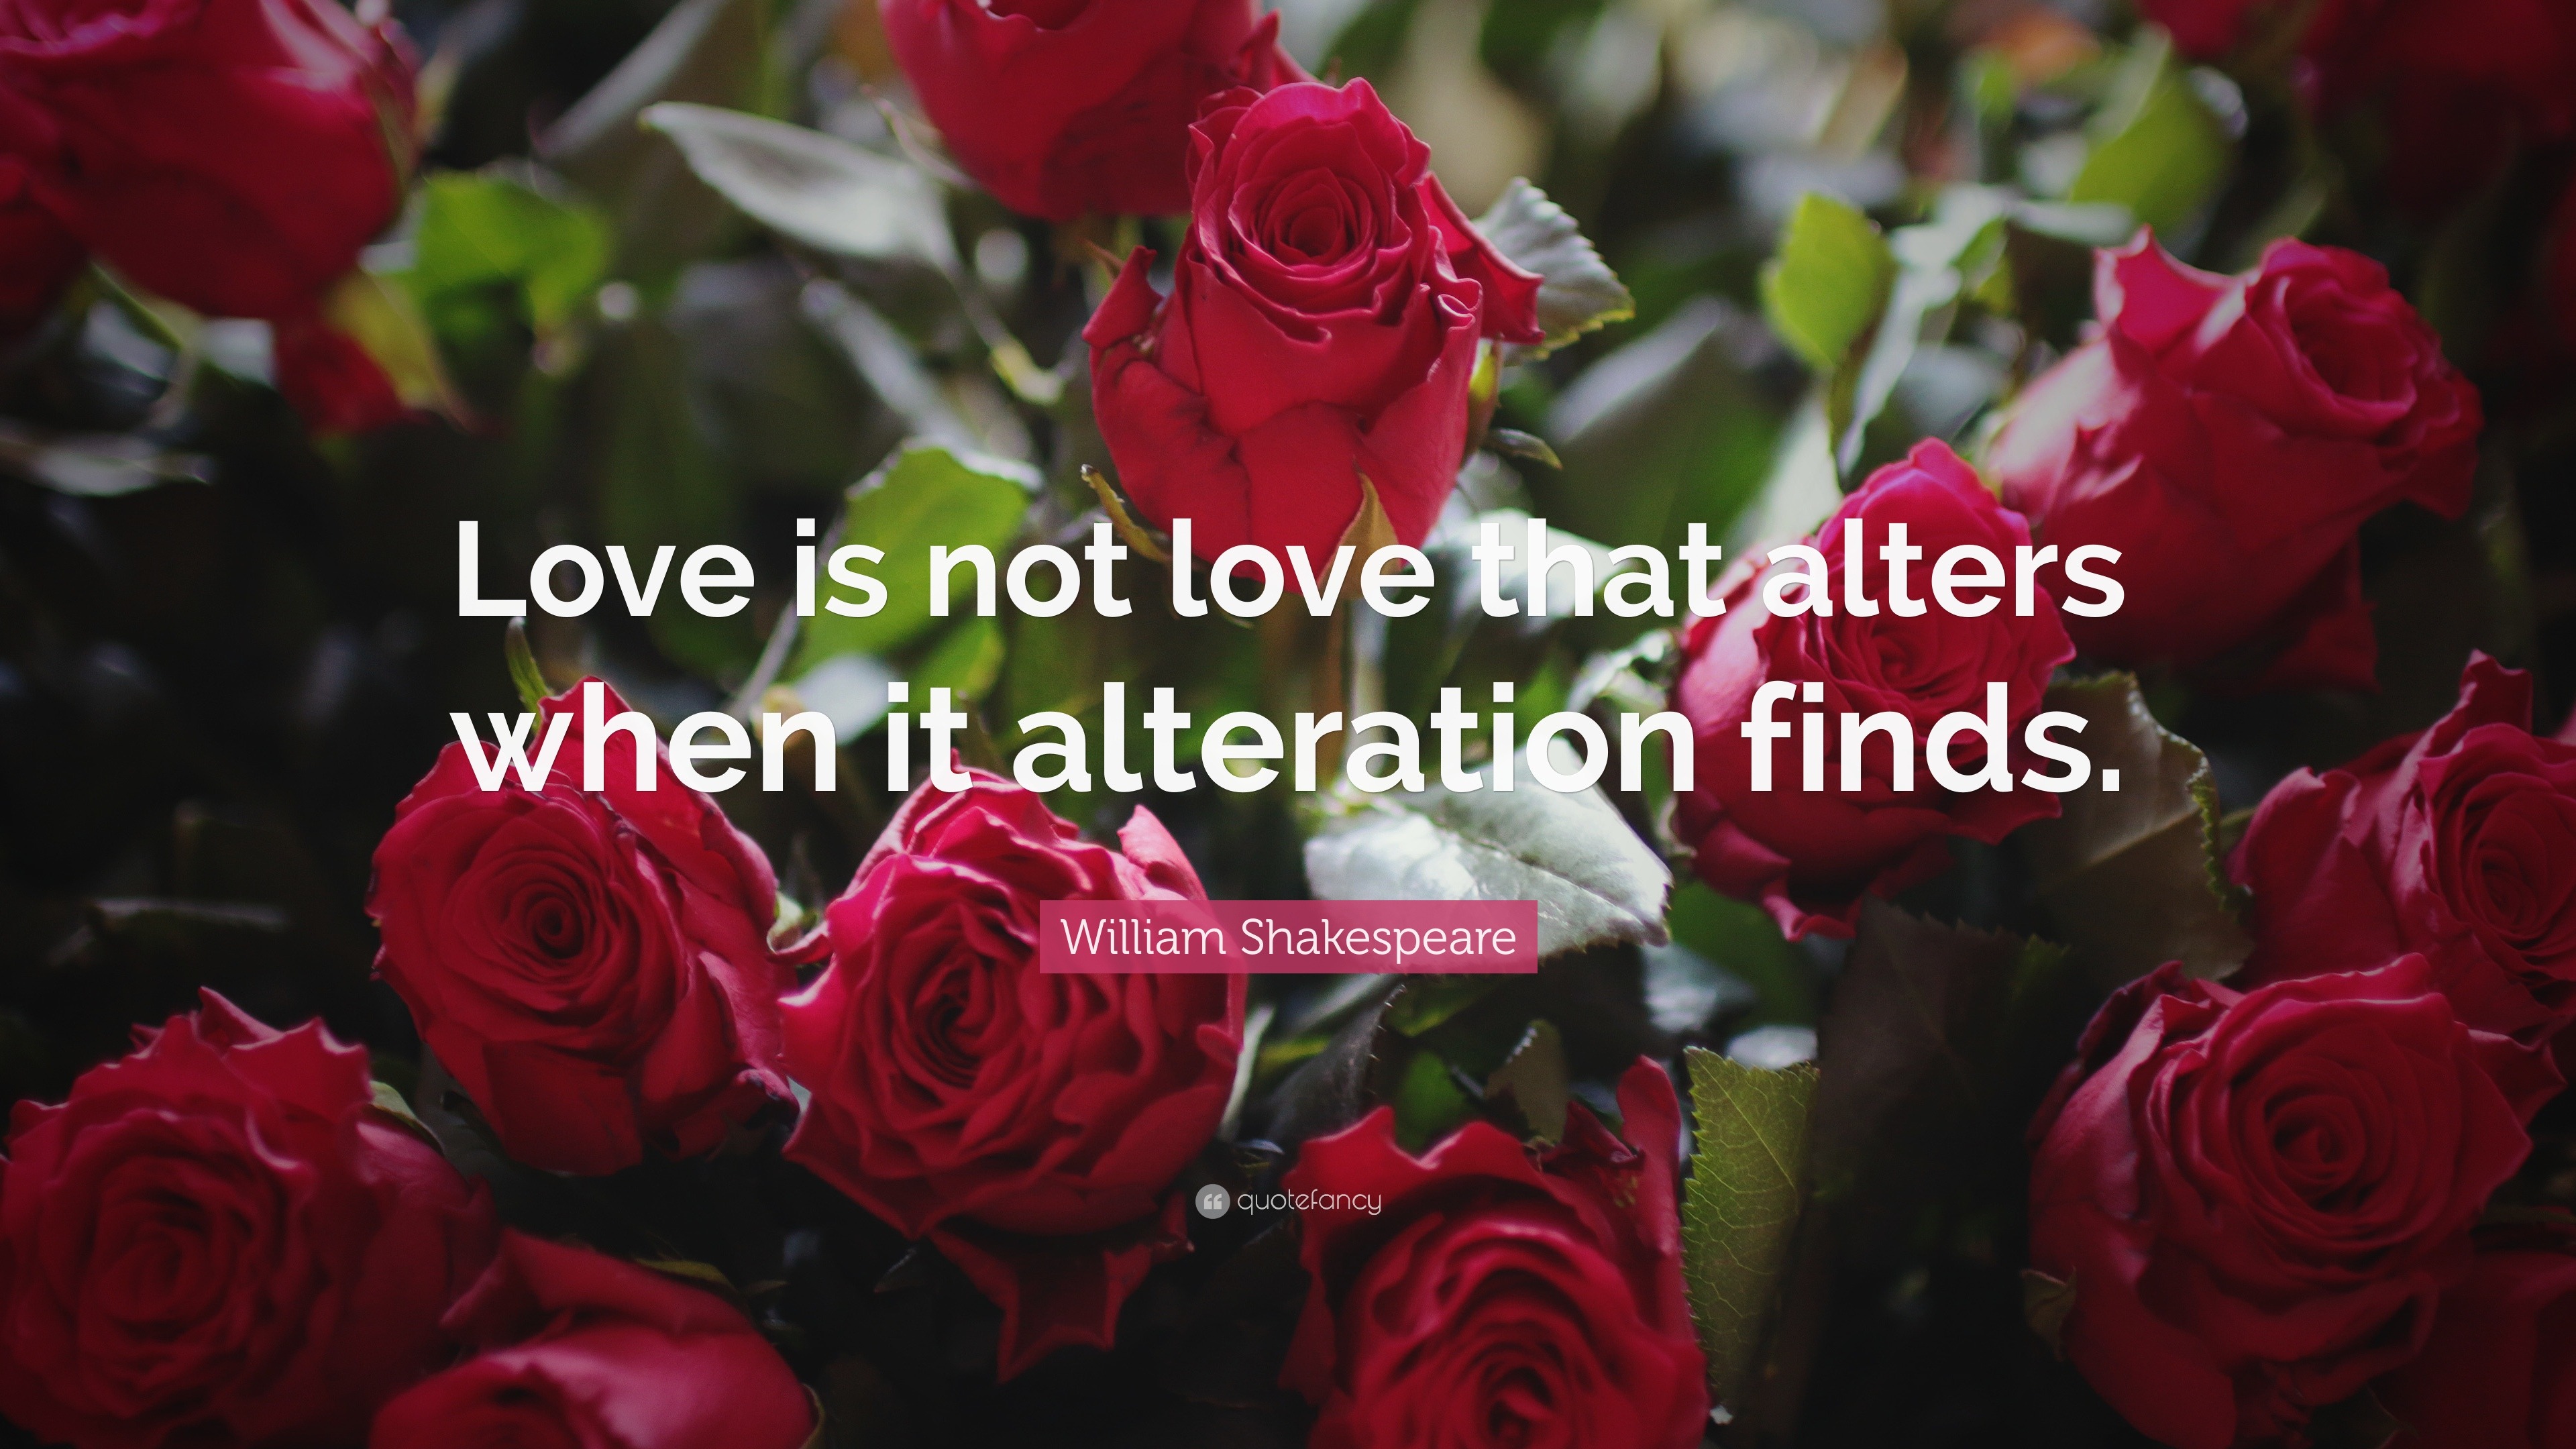 William Shakespeare Quote: “Love Is Not Love That Alters When It Alteration  Finds.”